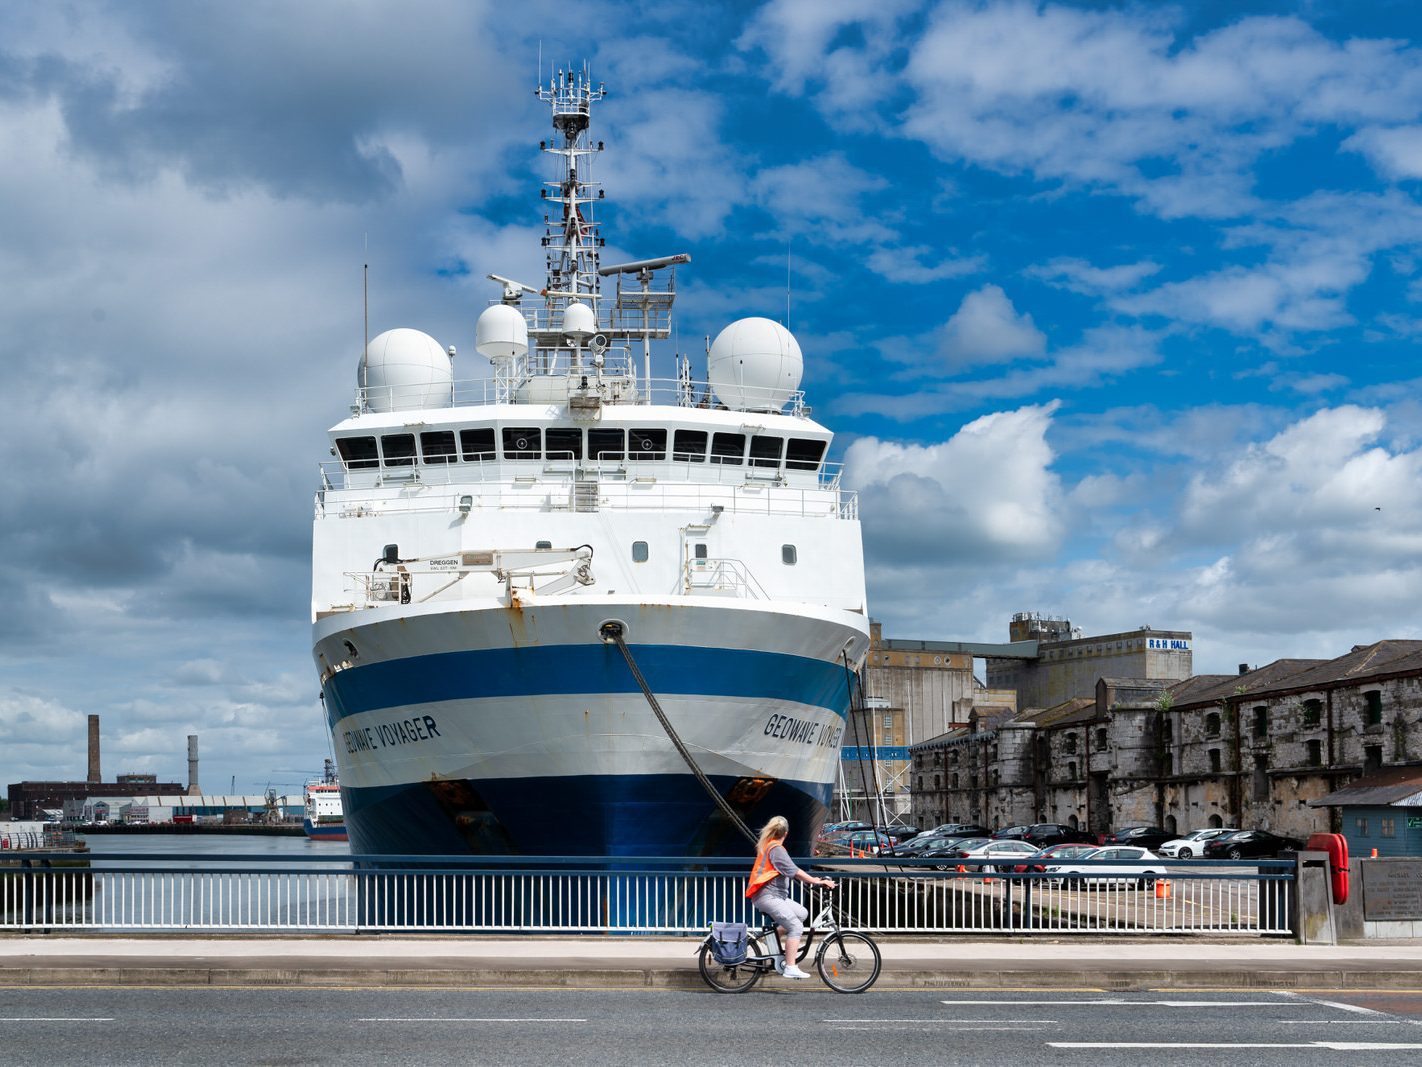 GEOWAVE VOYAGER LATER RENAMED EAGLE EXPLORER IMO 9381299 [AT CUSTOM HOUSE QUAY IN CORK JULY 2016] 008